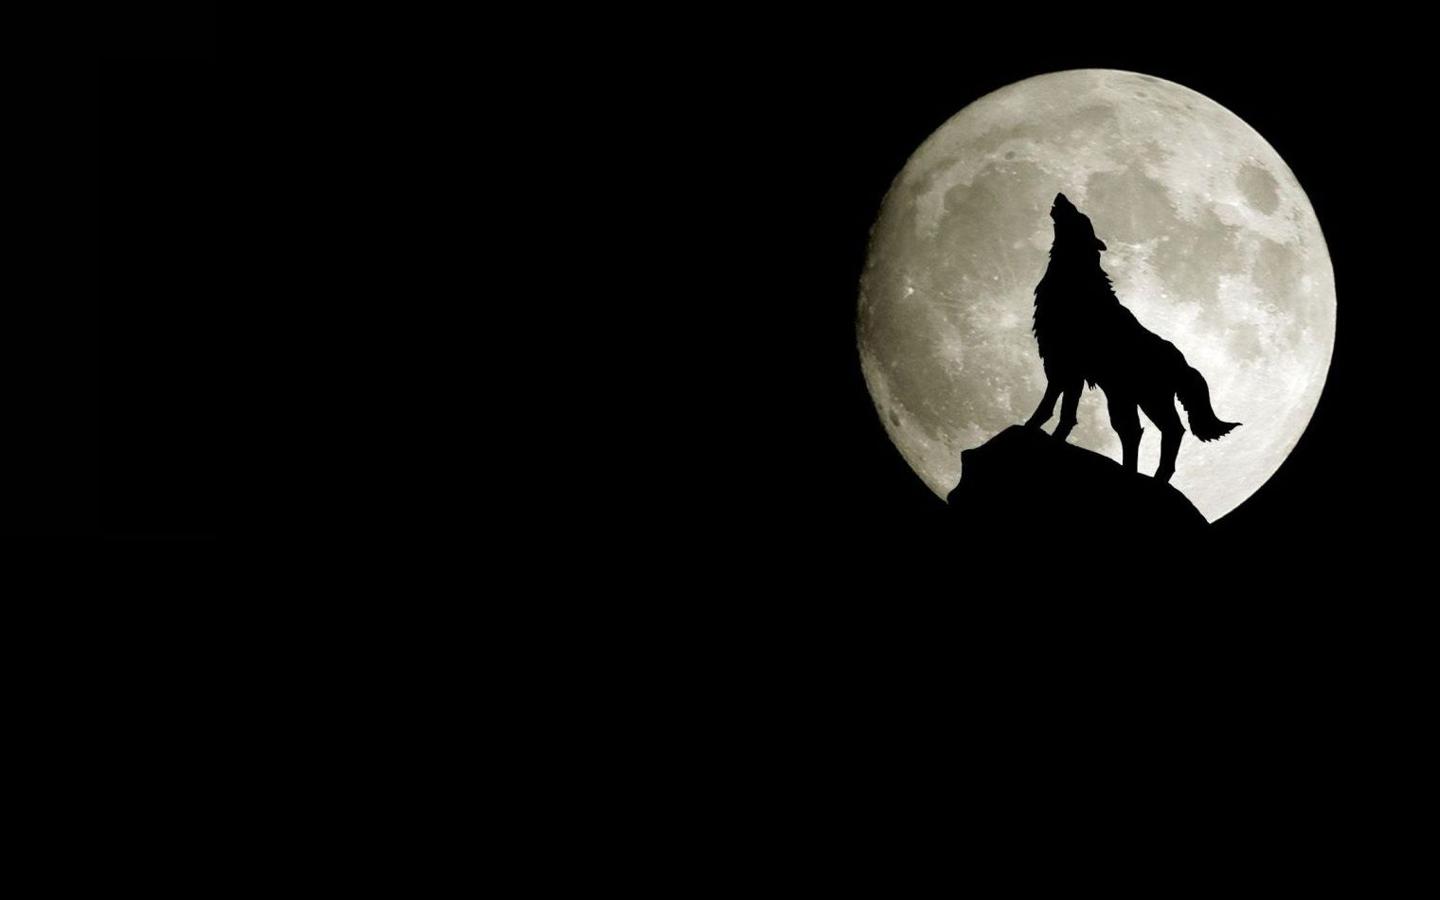 Moonlight wolf cry creative image_picture free download 500565030_lovepik.com